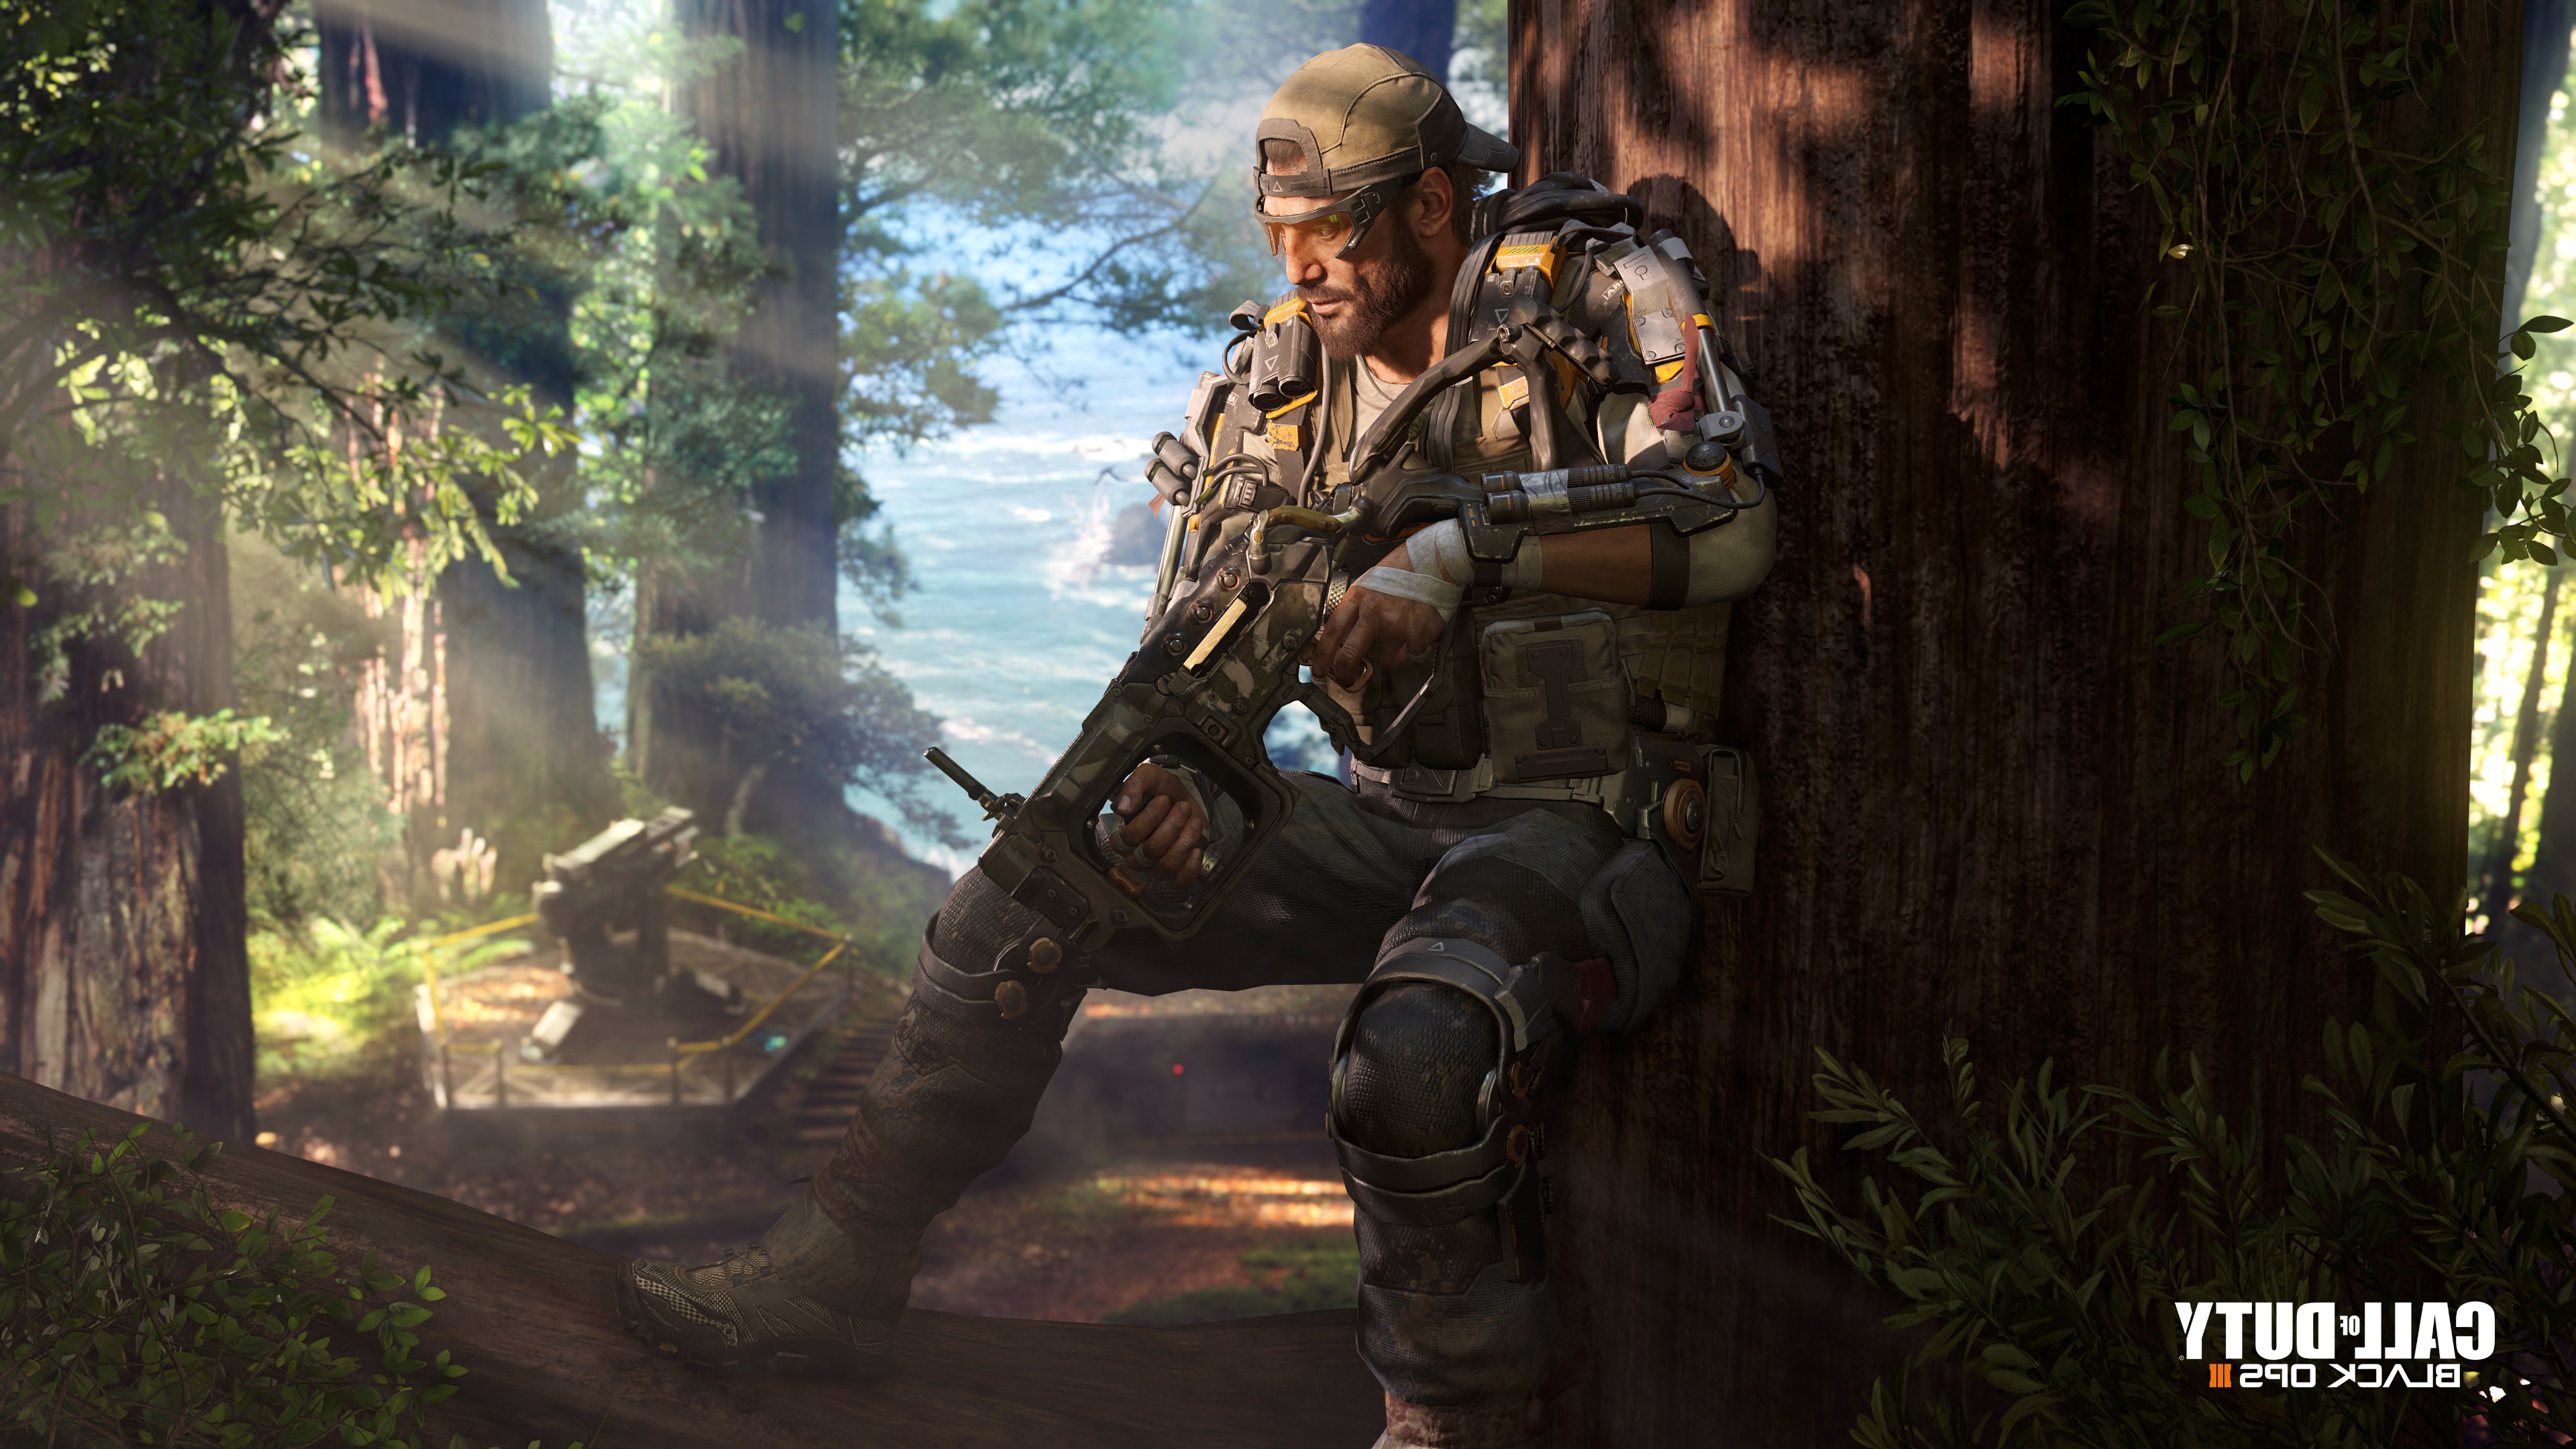 Wallpaper : video games, PC gaming, Call of Duty Black Ops III